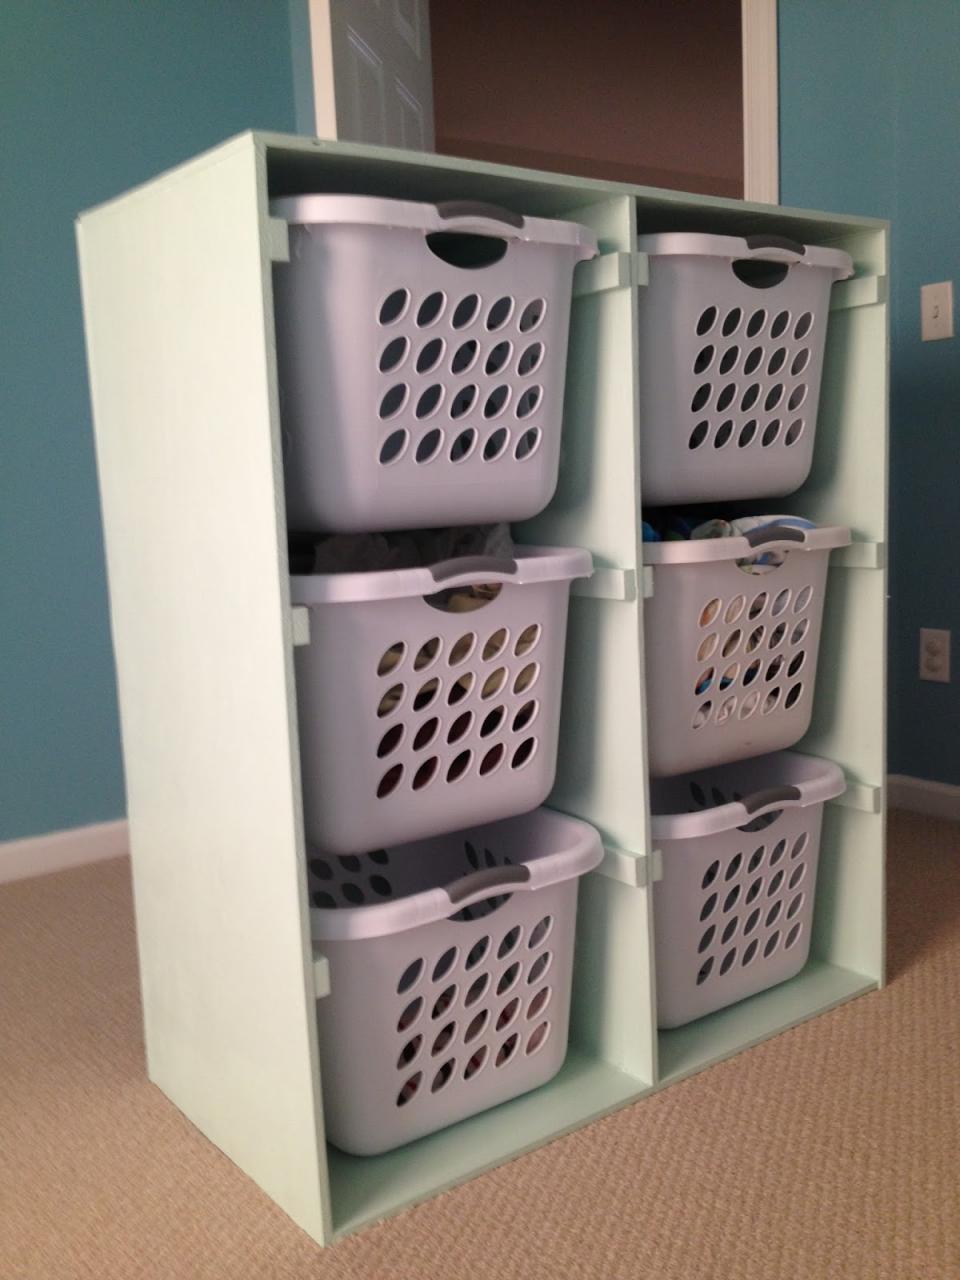 Charlotte's Empire Build Shelves for your laundry baskets